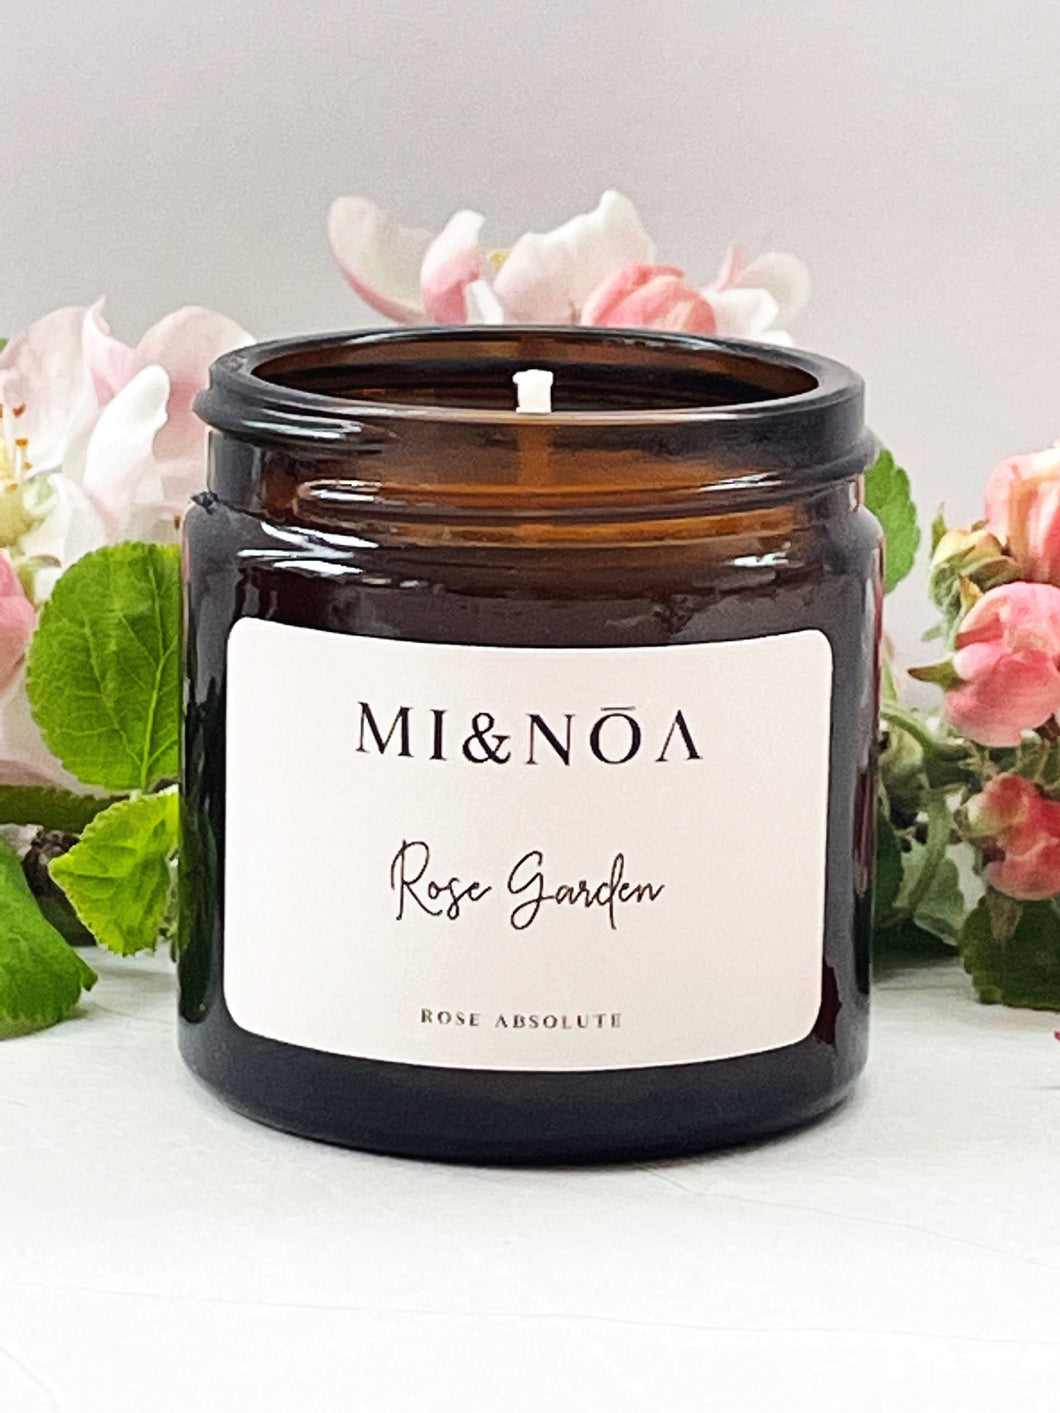 Rose Garden Soy Wax Essential Oil Candle